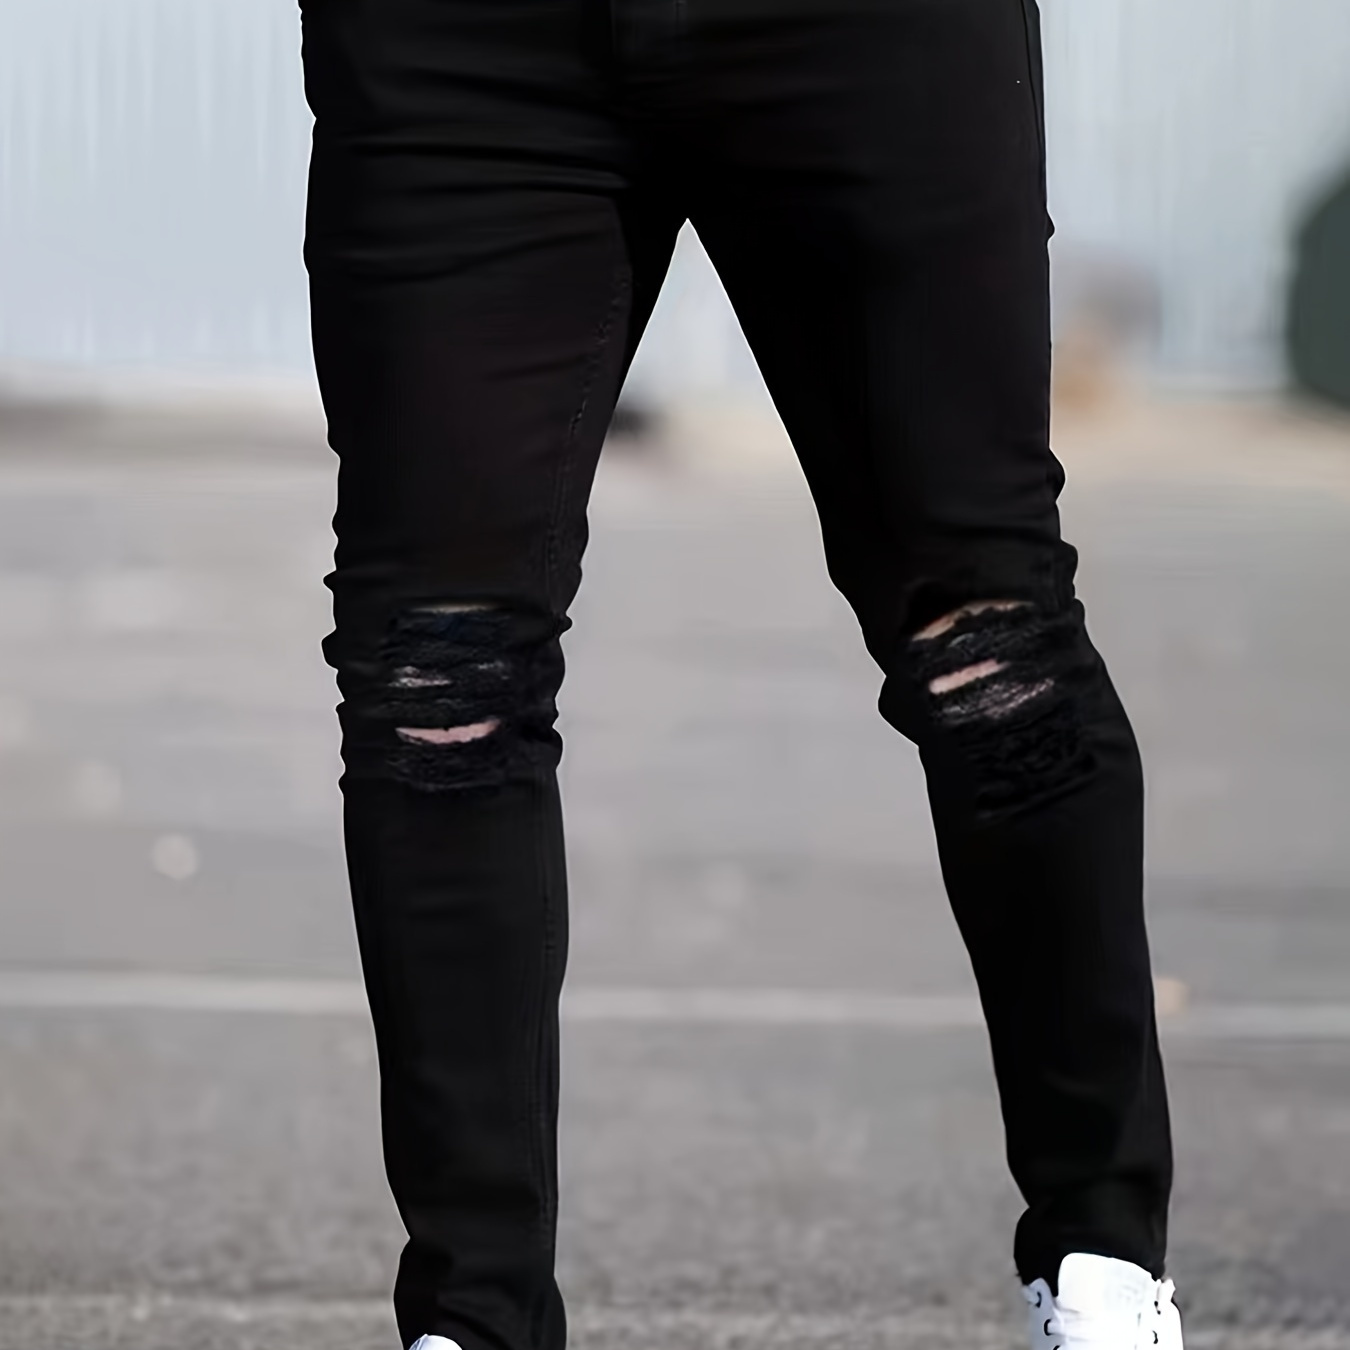 

Chic Ripped Skinny Jeans, Men's Casual Street Style Distressed Medium Stretch Denim Pants